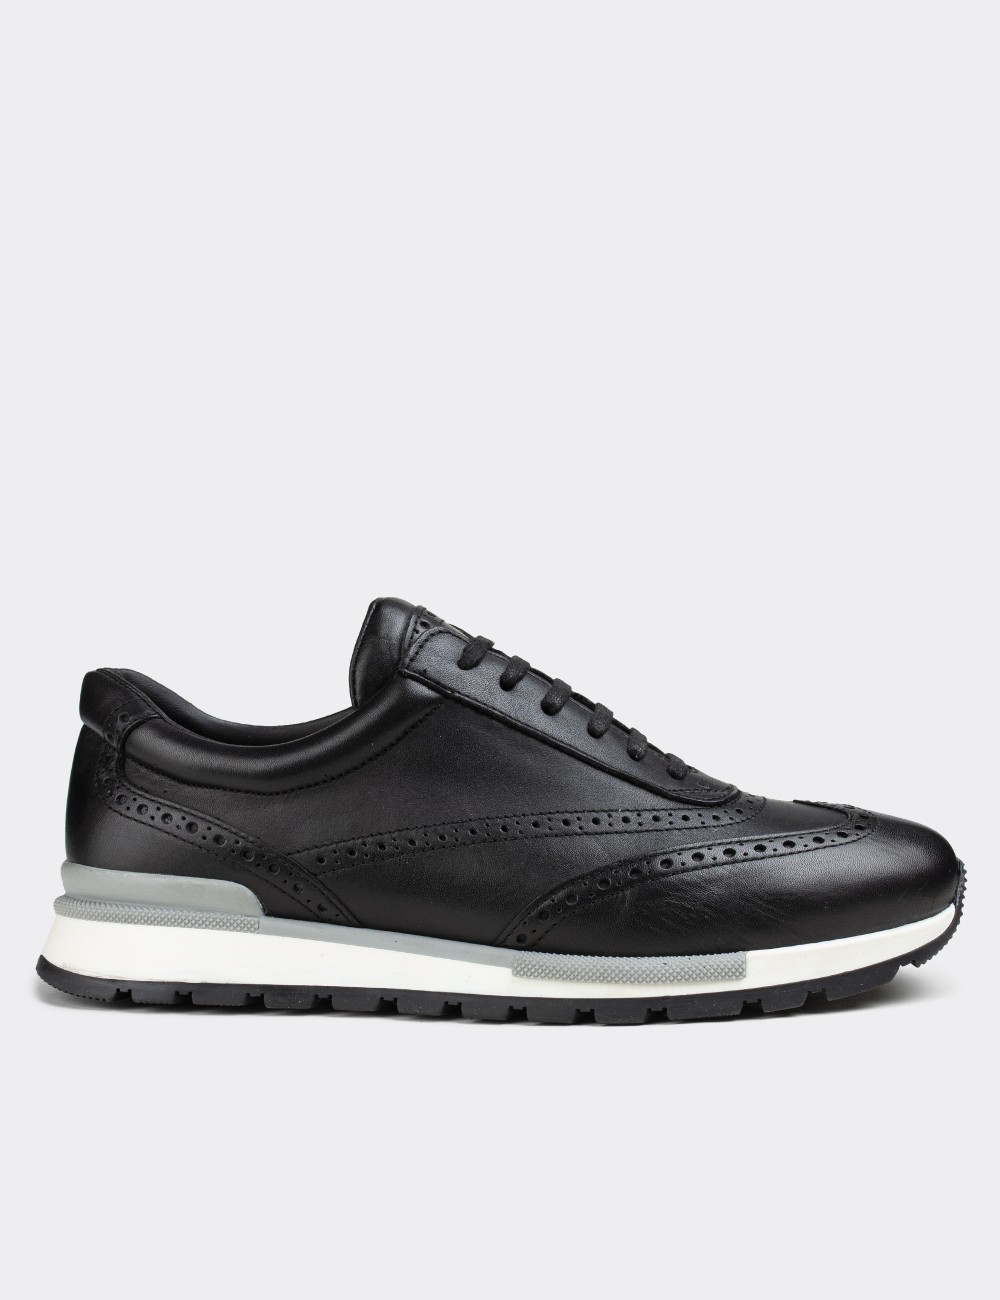 Black  Leather  Sneakers - 00750MSYHT03